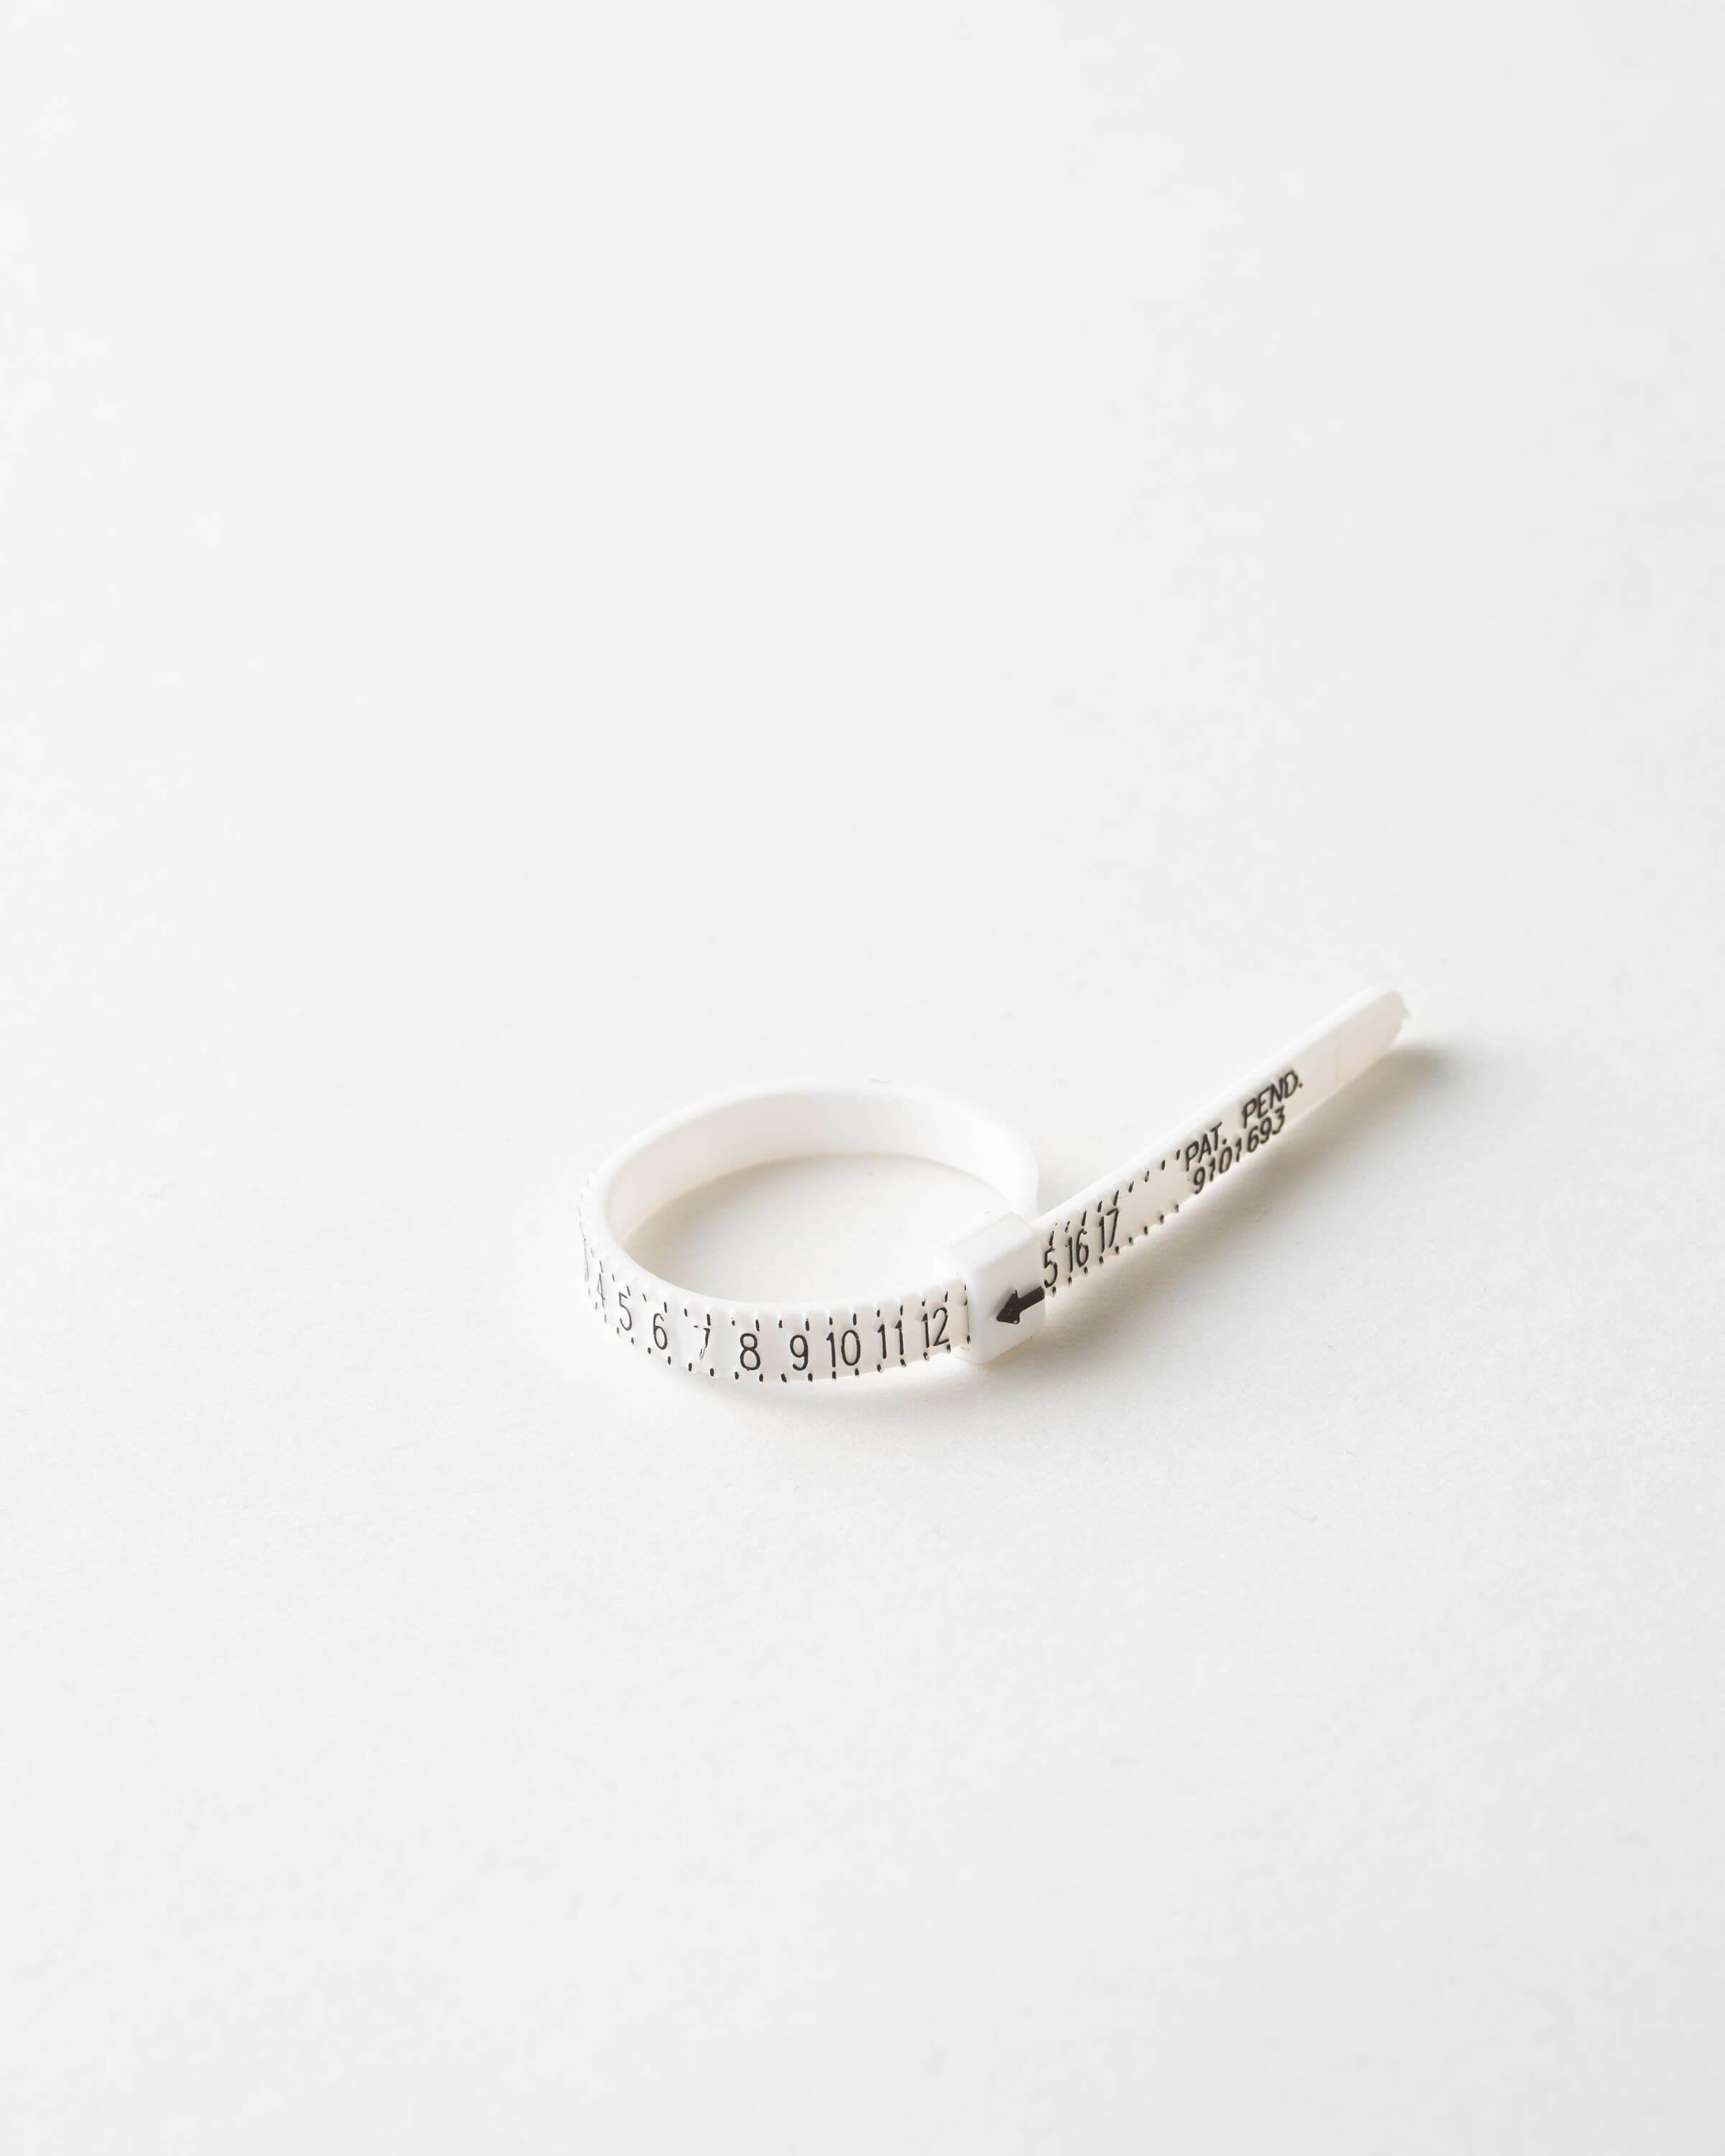 How to Measure Your Ring Size? Measuring Guide - Yasmin Jewelry KL